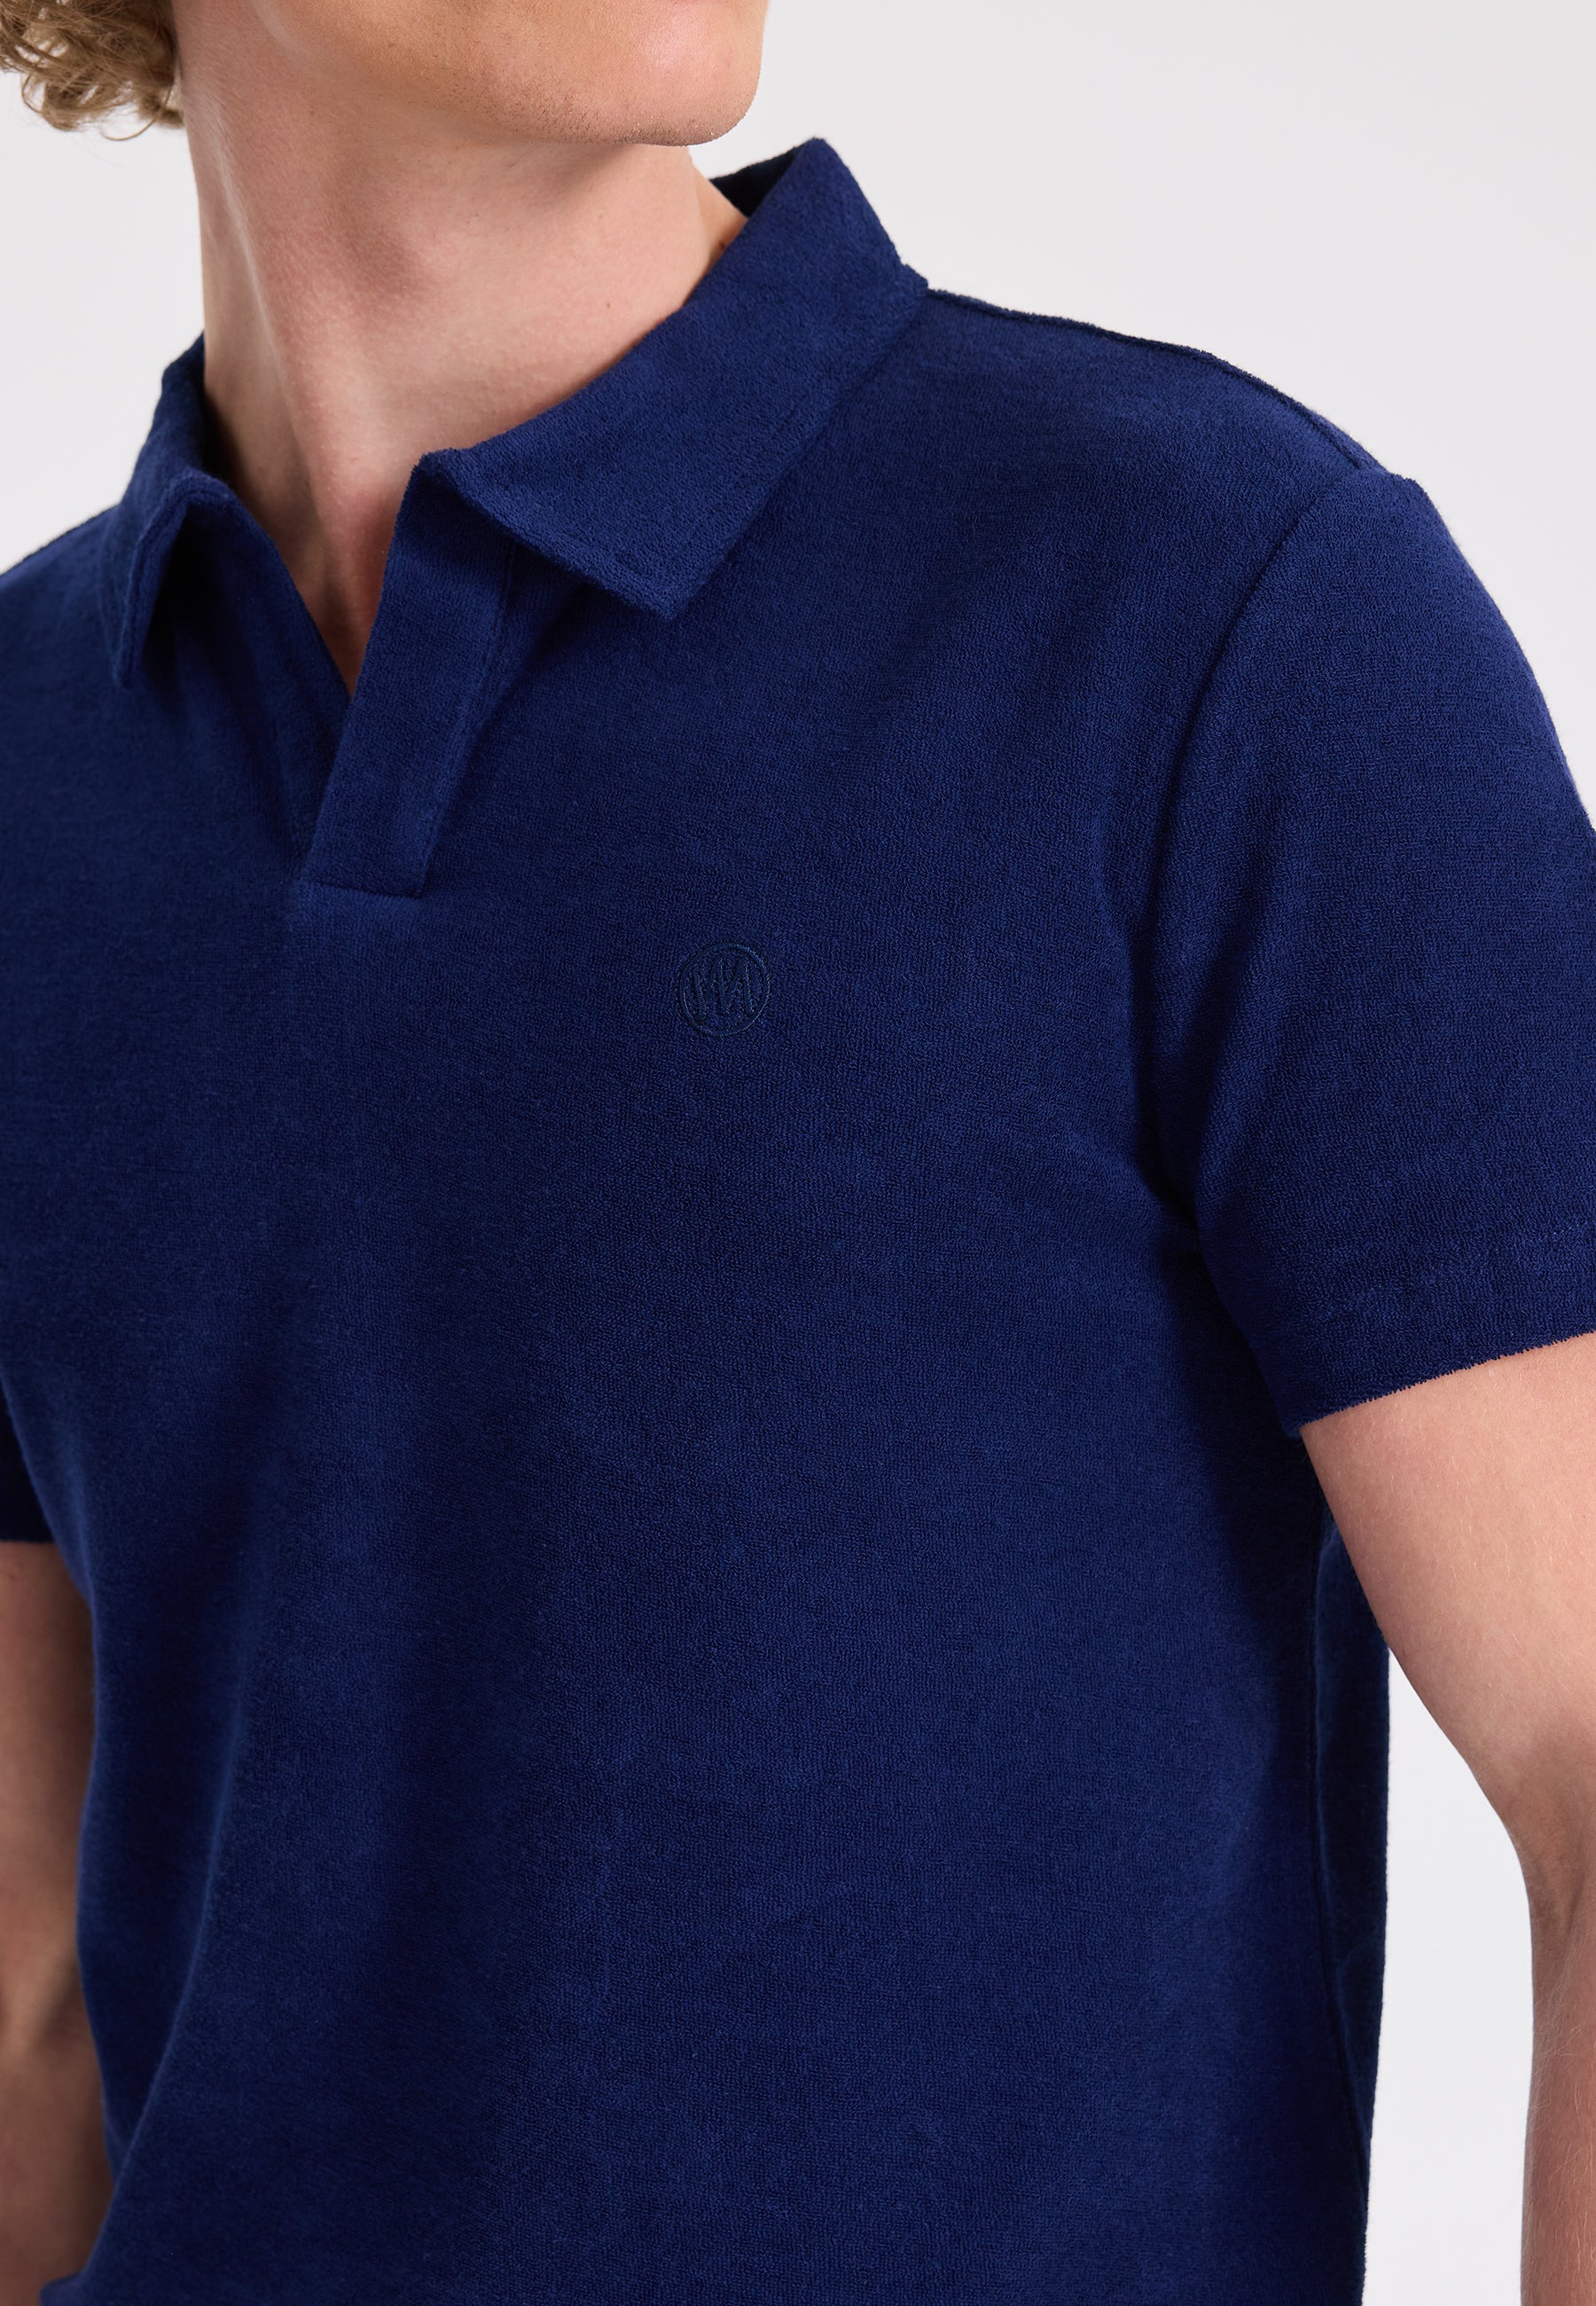 BREEZE TOWELLING POLO SHIRT in Naval Academy